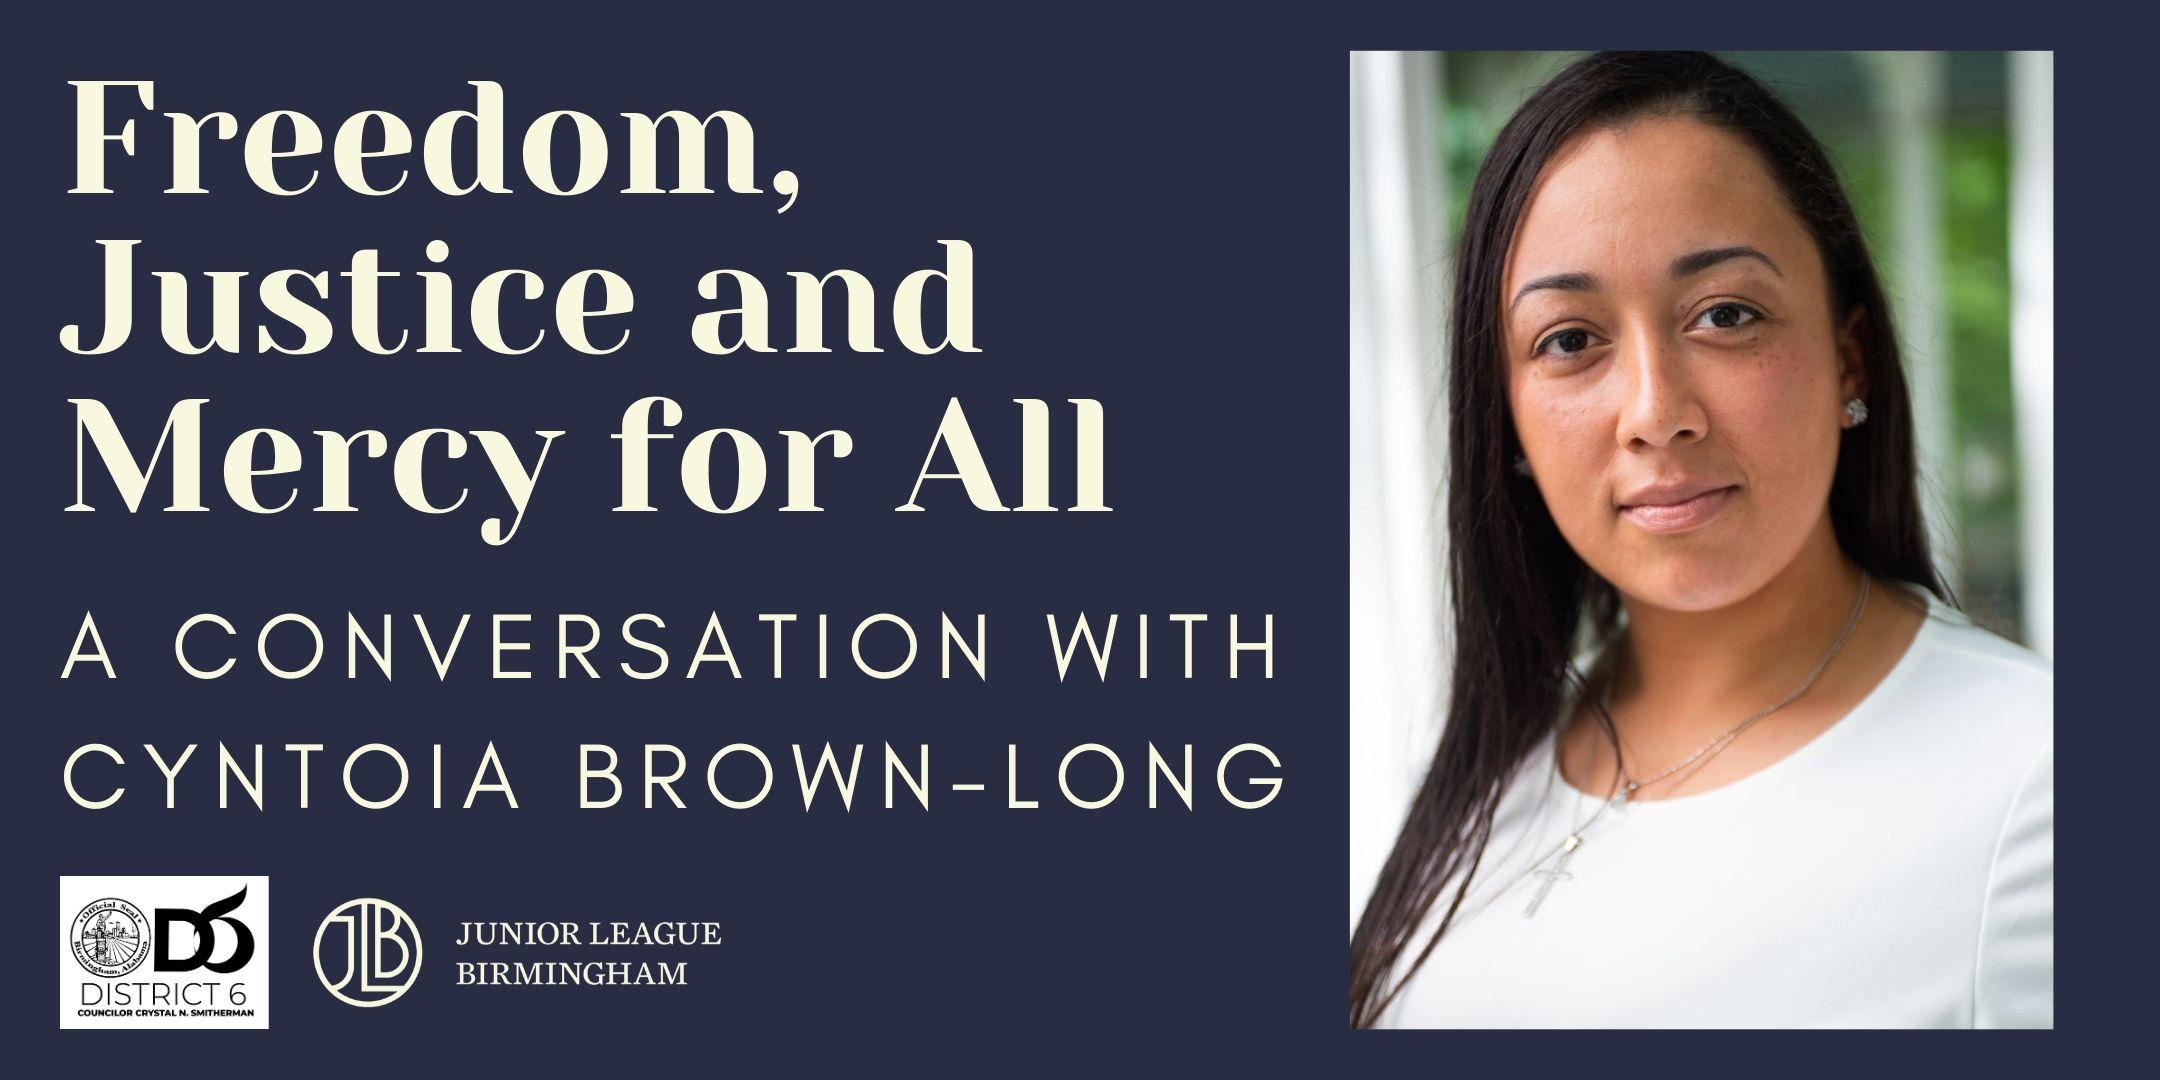 Freedom, Justice, and Mercy for All: A Conversation with Cyntoia Brown-Long